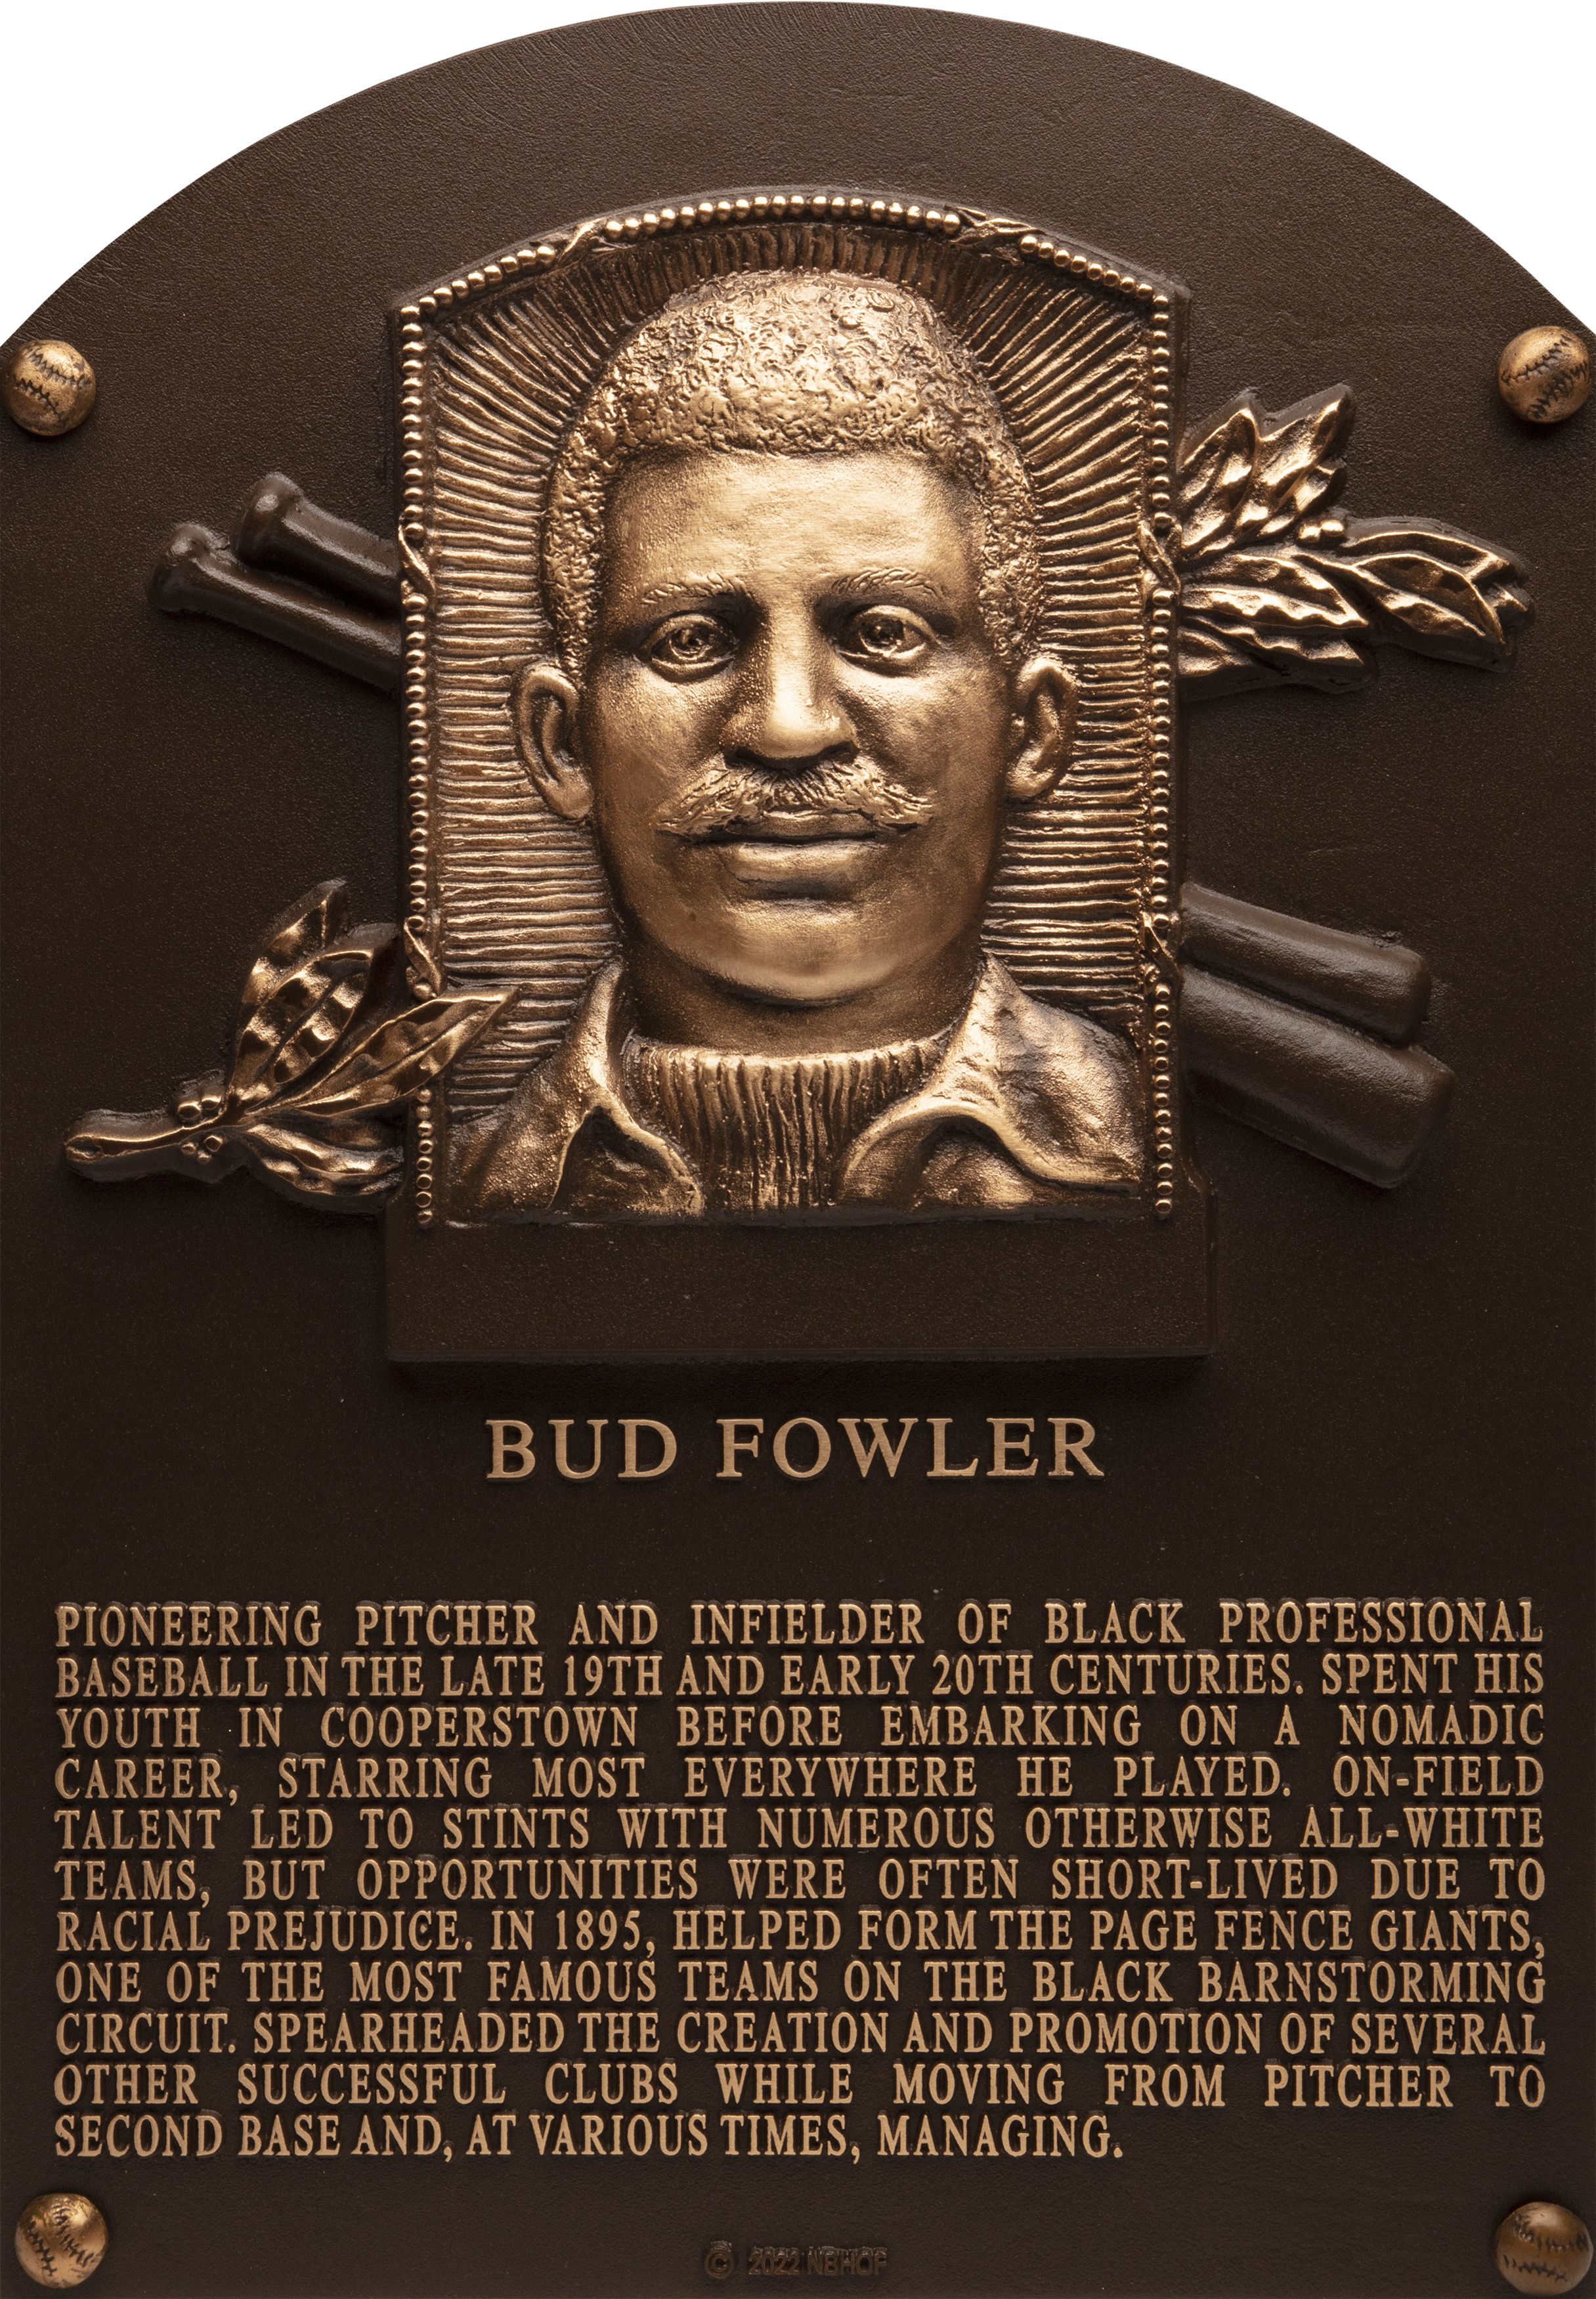 Bud Fowler Hall of Fame plaque